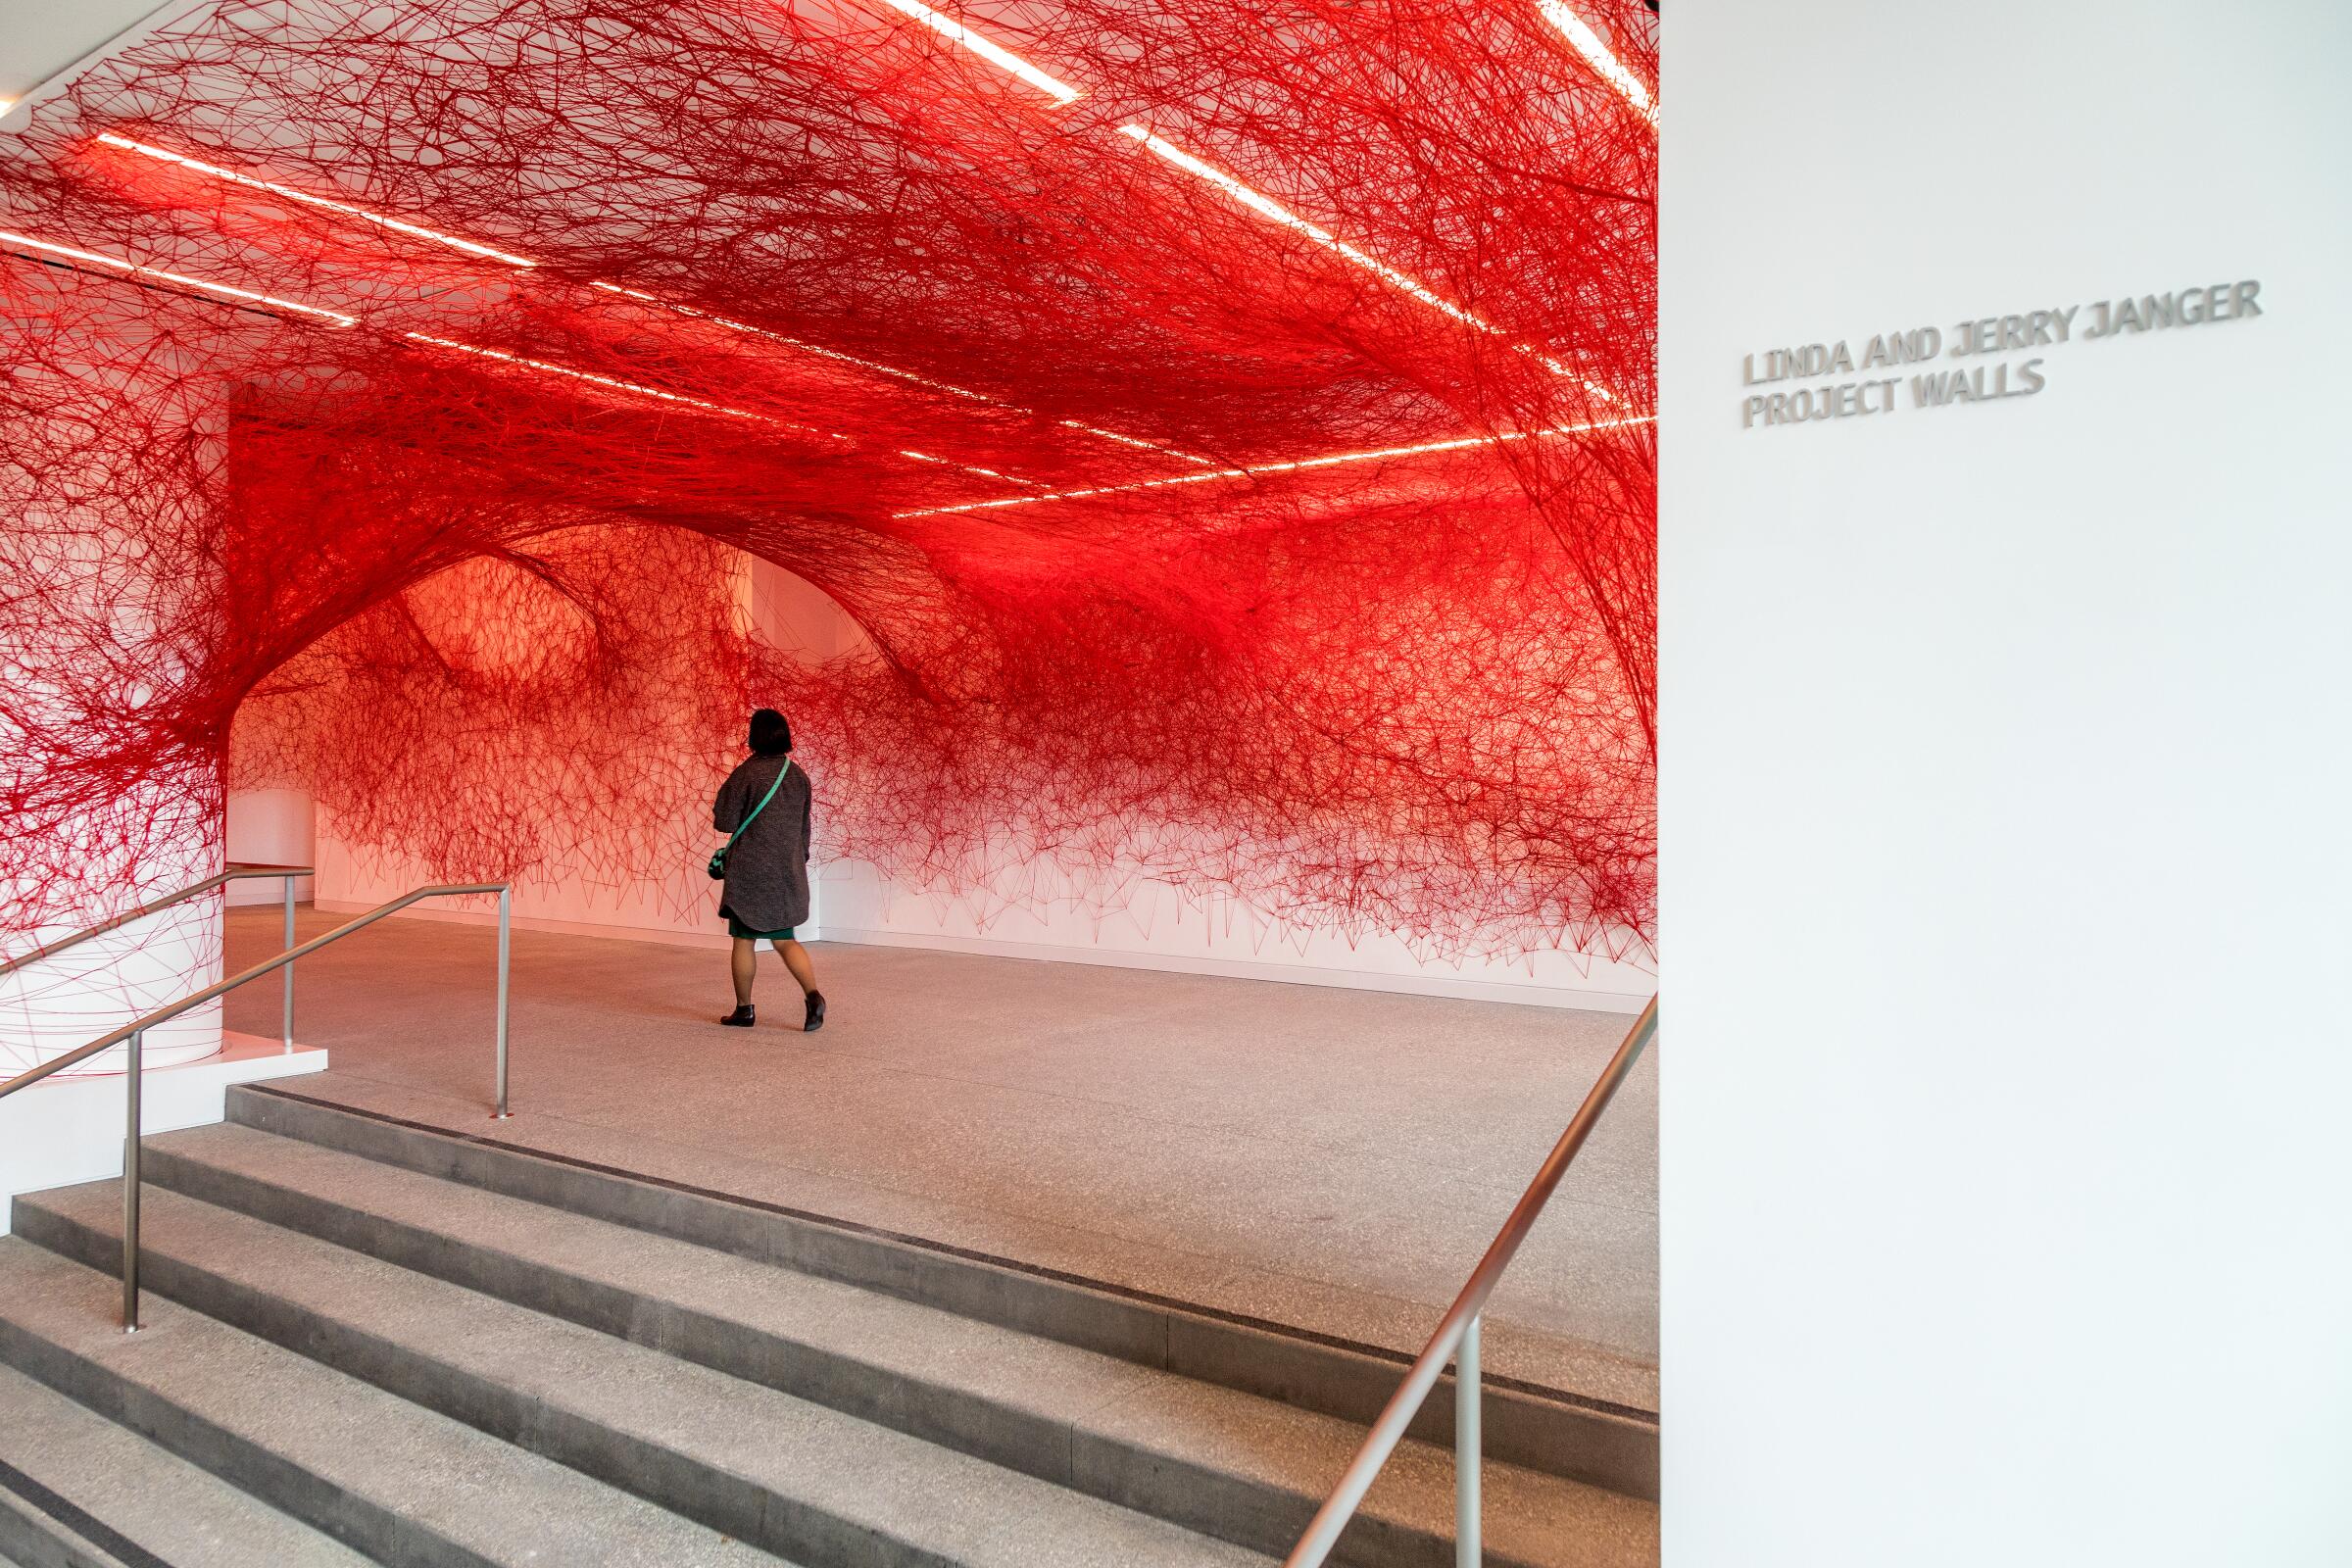 Artist Chiharu Shiota's installation "The Network," made with red yarn, in the lobby of the newly renovated Hammer Museum